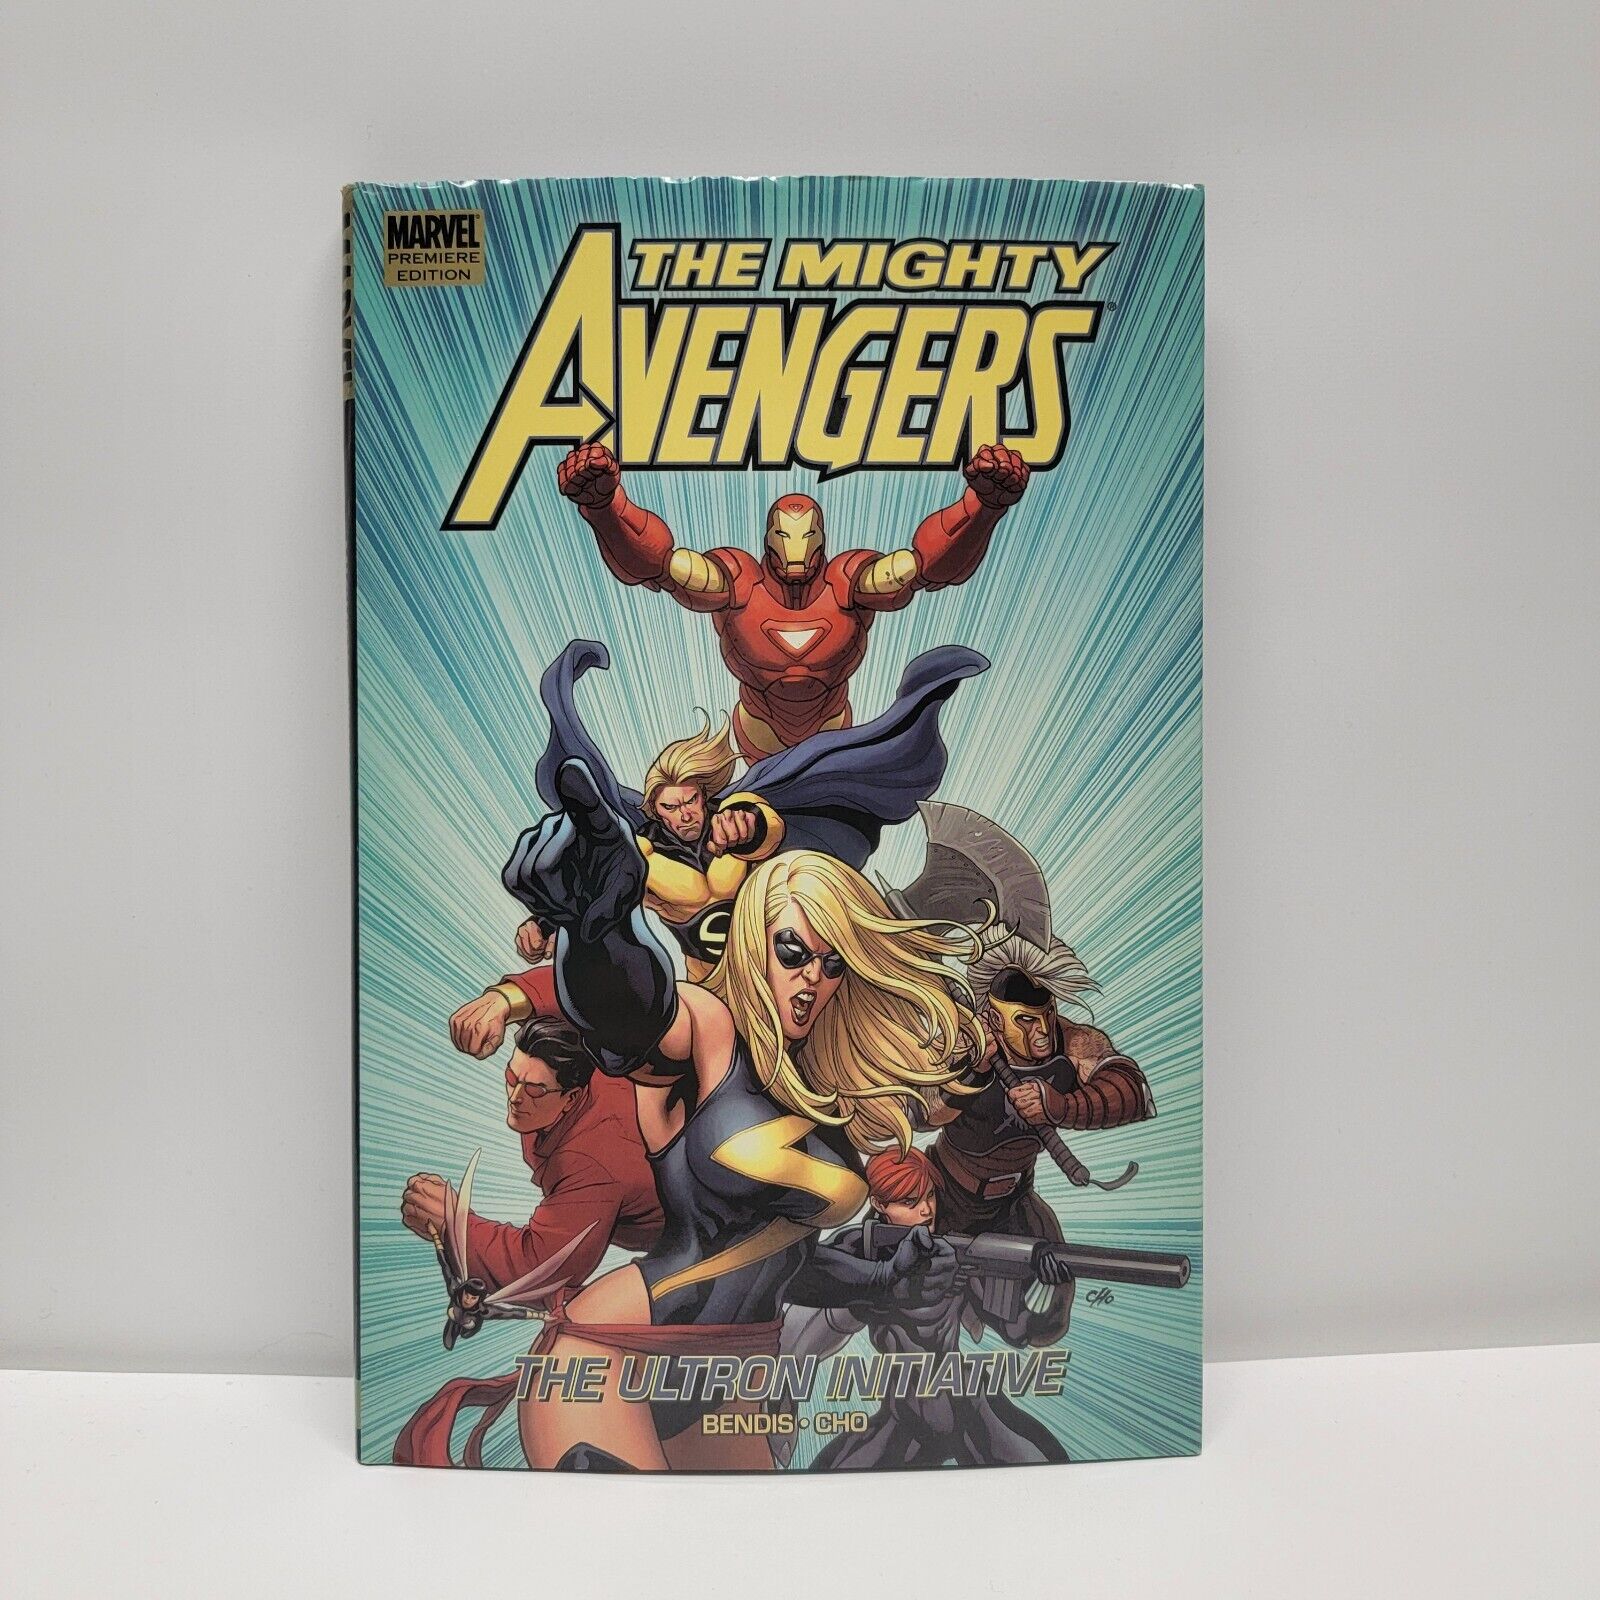 The Mighty Avengers The Ultron Initiative Graphic Novel Marvel Premiere Edition